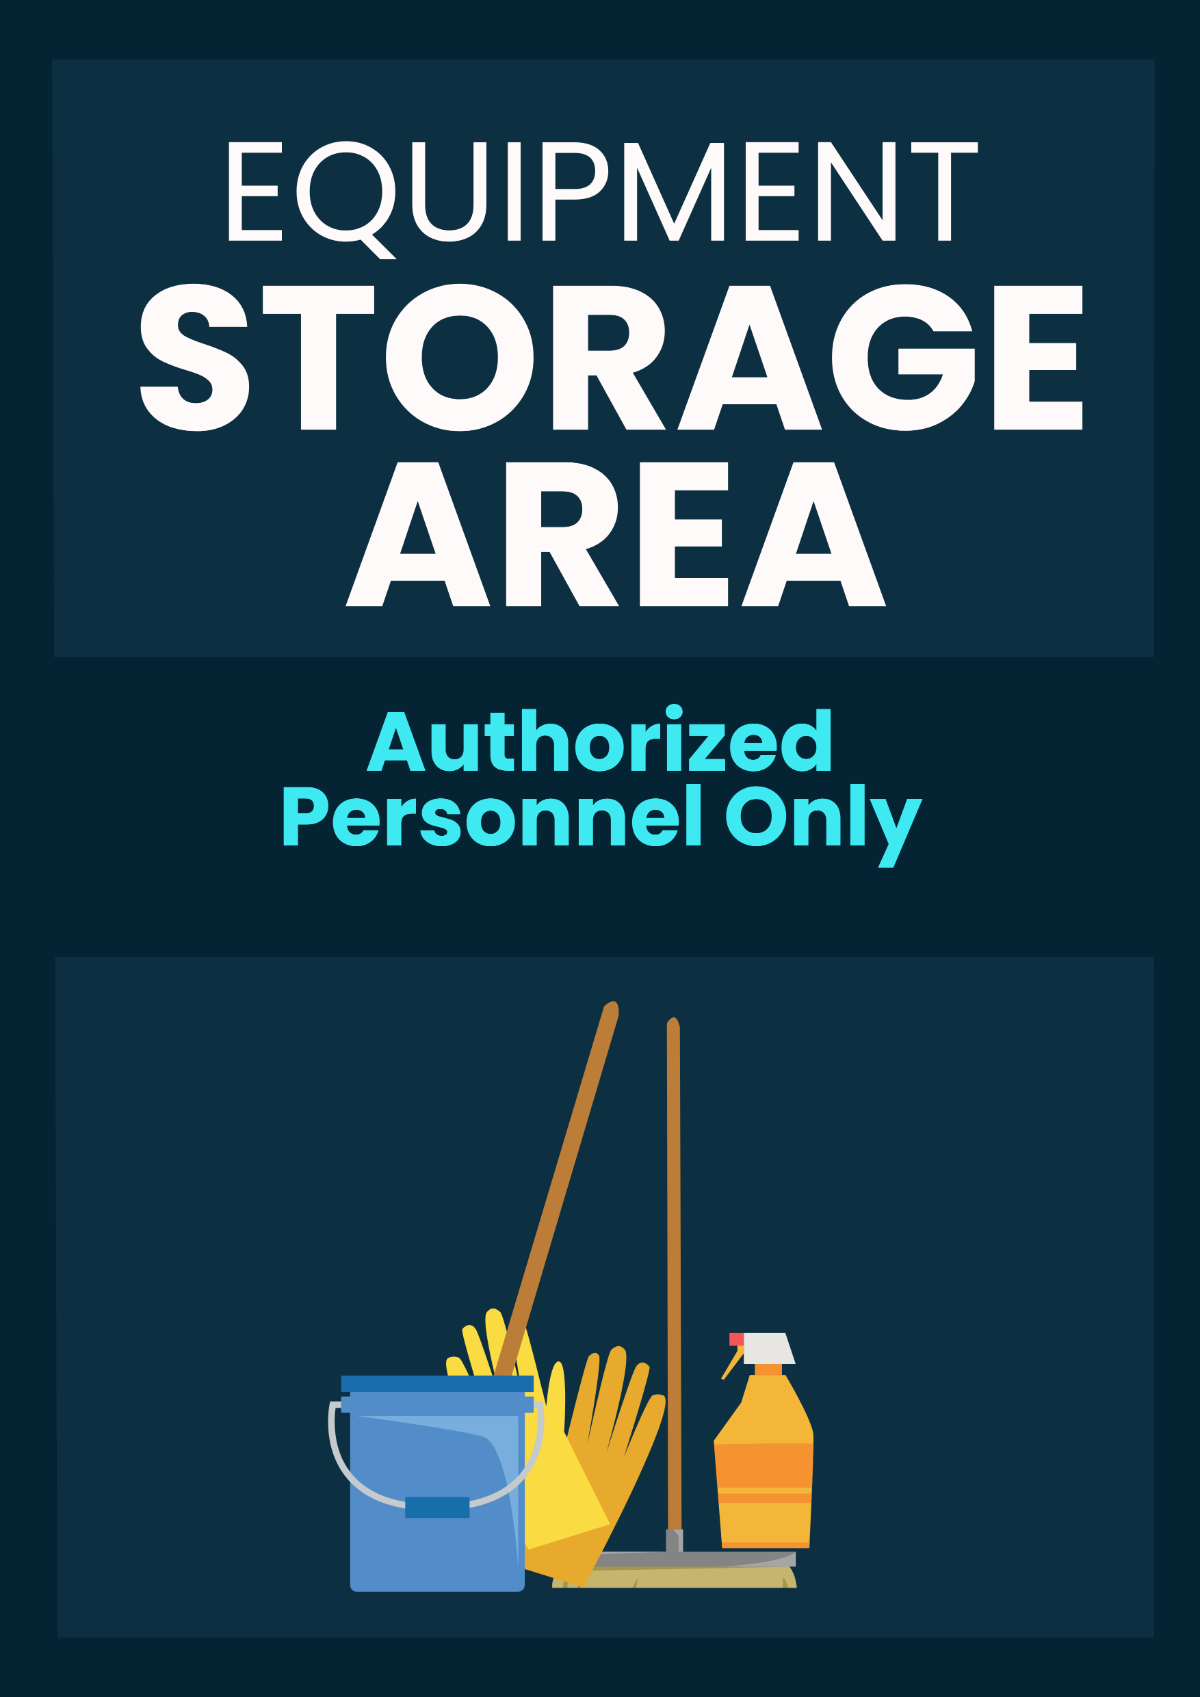 Free Equipment Storage Area Signage Template for Cleaning Services